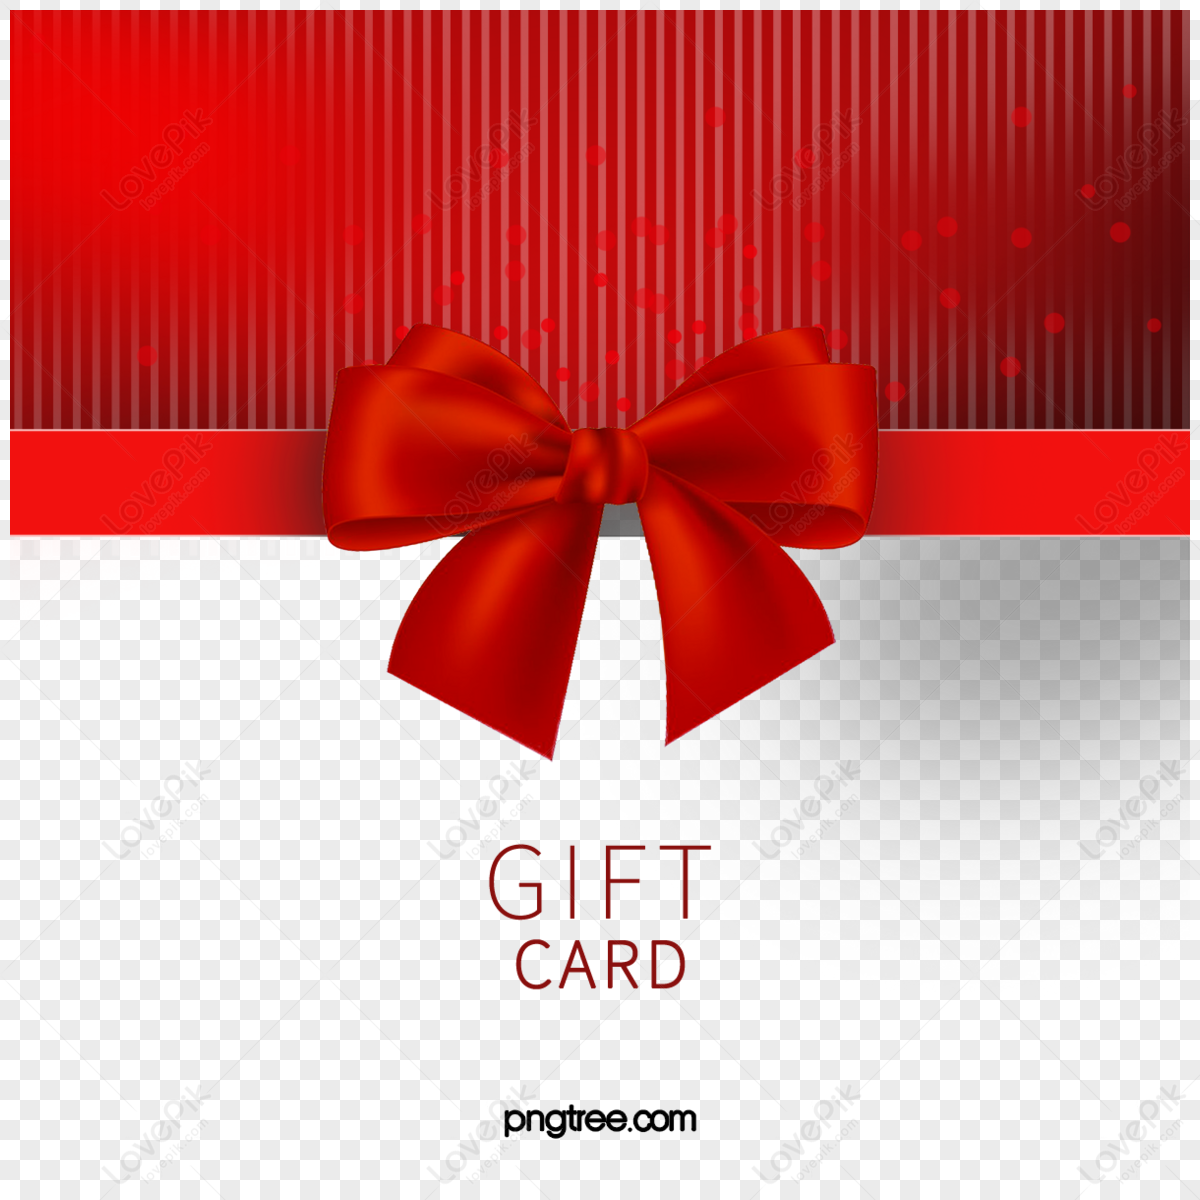 Free gift card Clipart Images | FreeImages